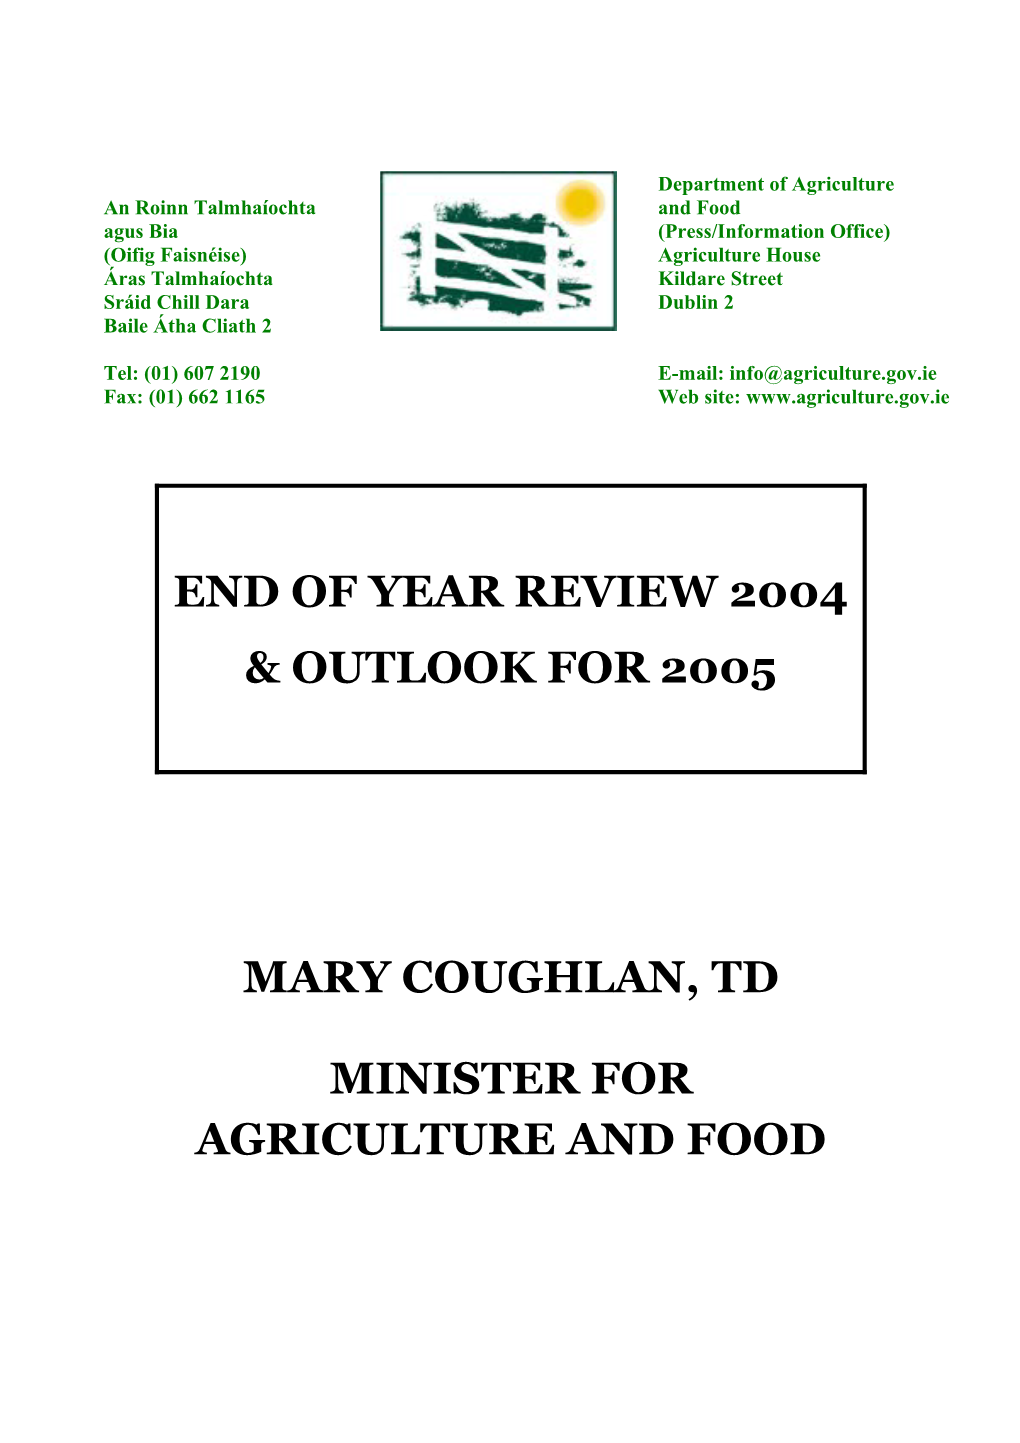 End of Year Review 2004 & Outlook for 2005